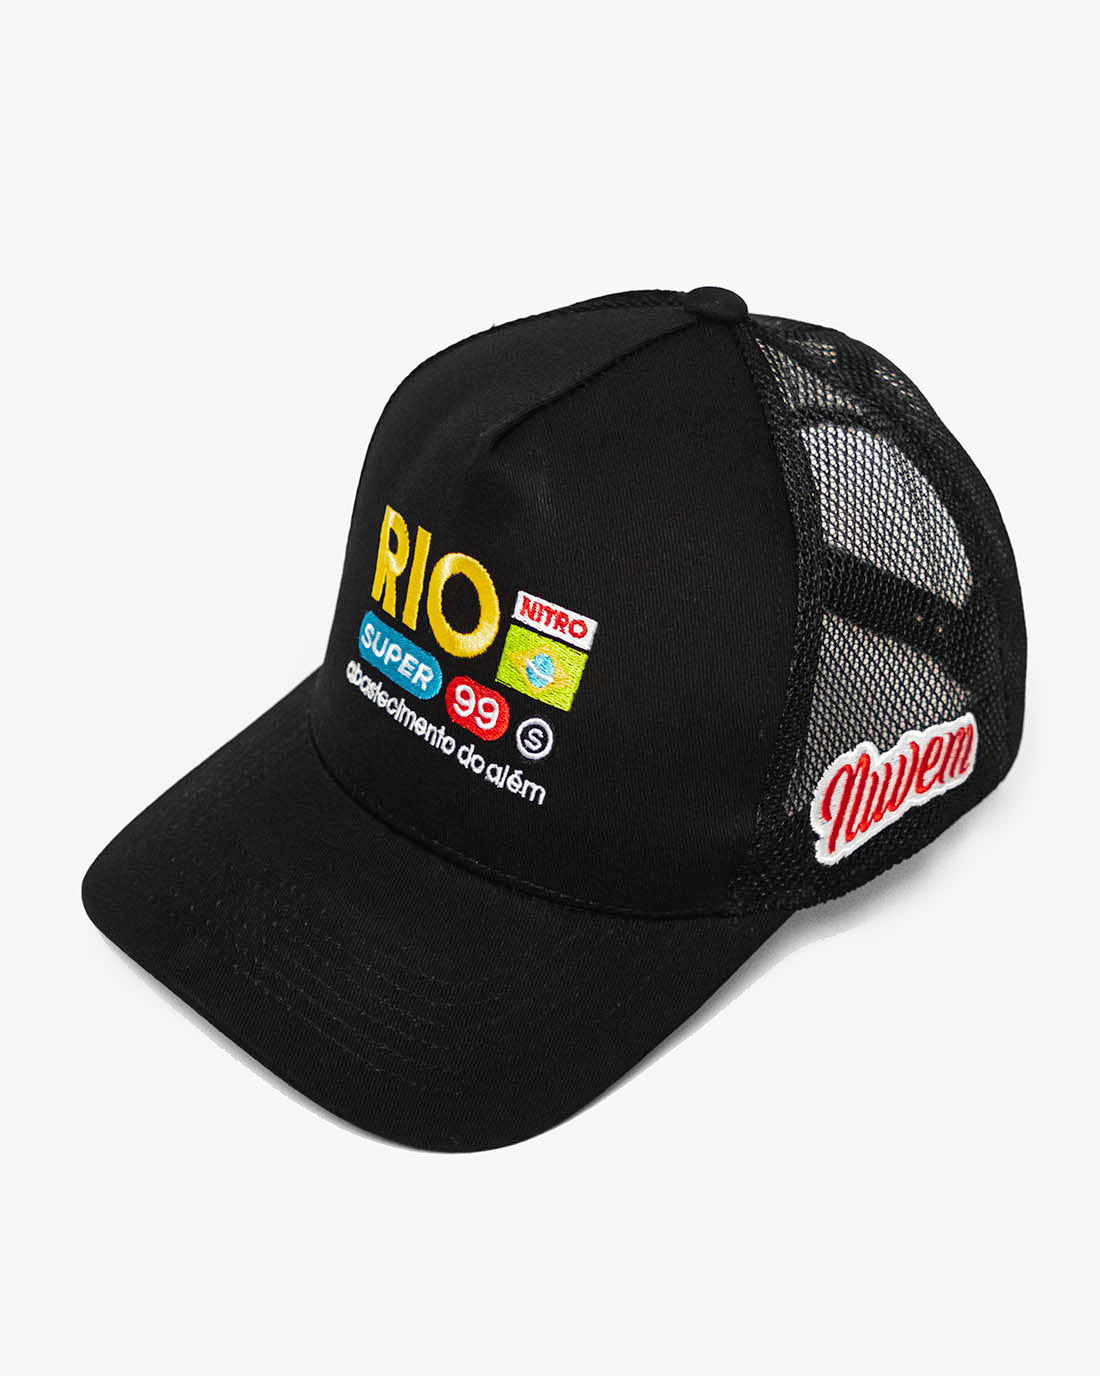 Front view of a black snapback hat with colorful Brazilian-inspired embroidered design and cooling mesh back.